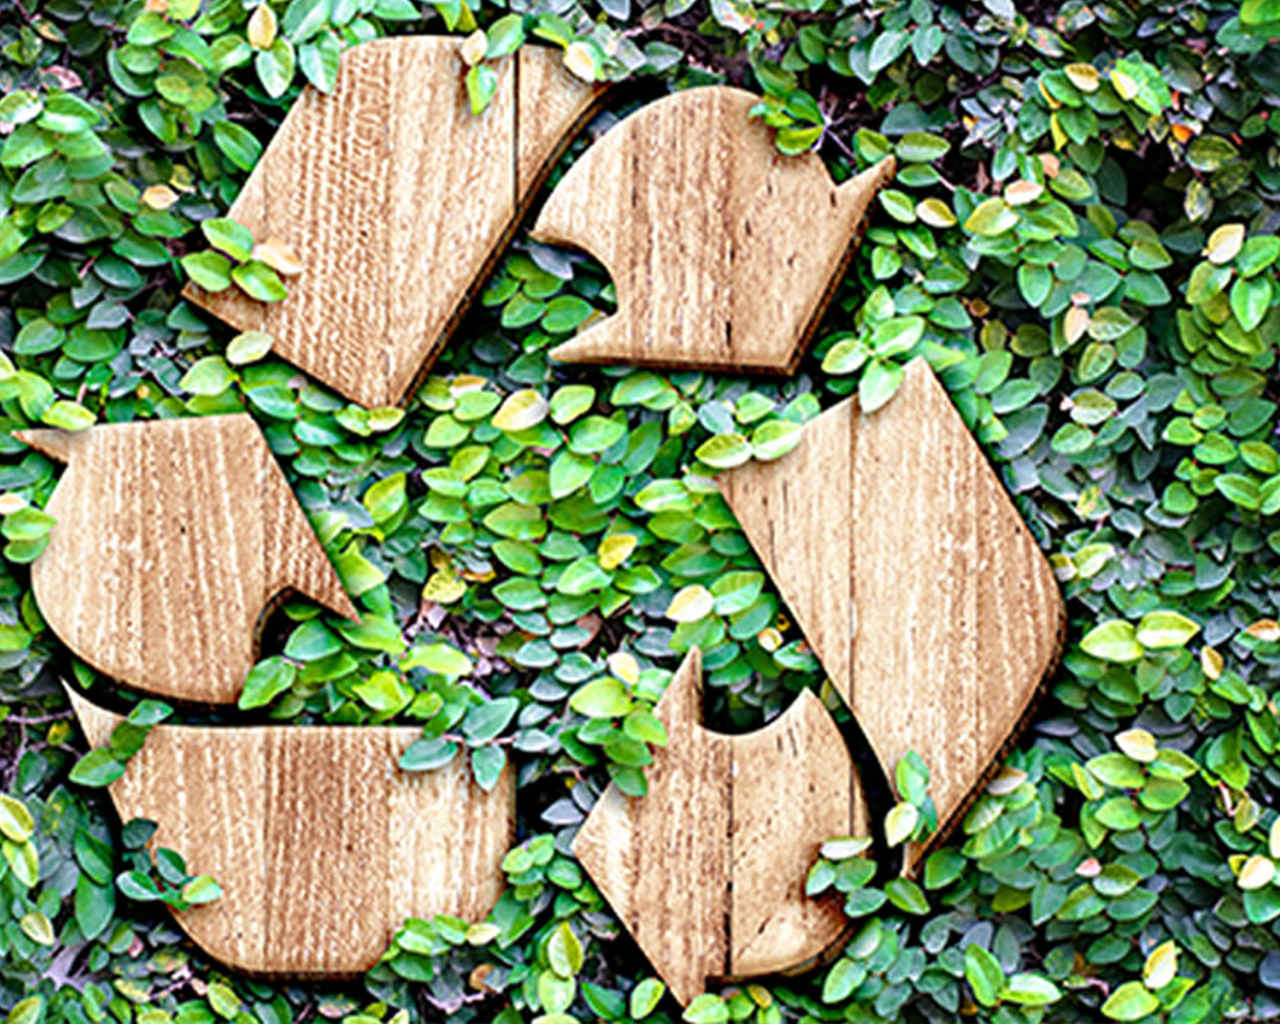 A recyclable logo made with wood on a surface of plants